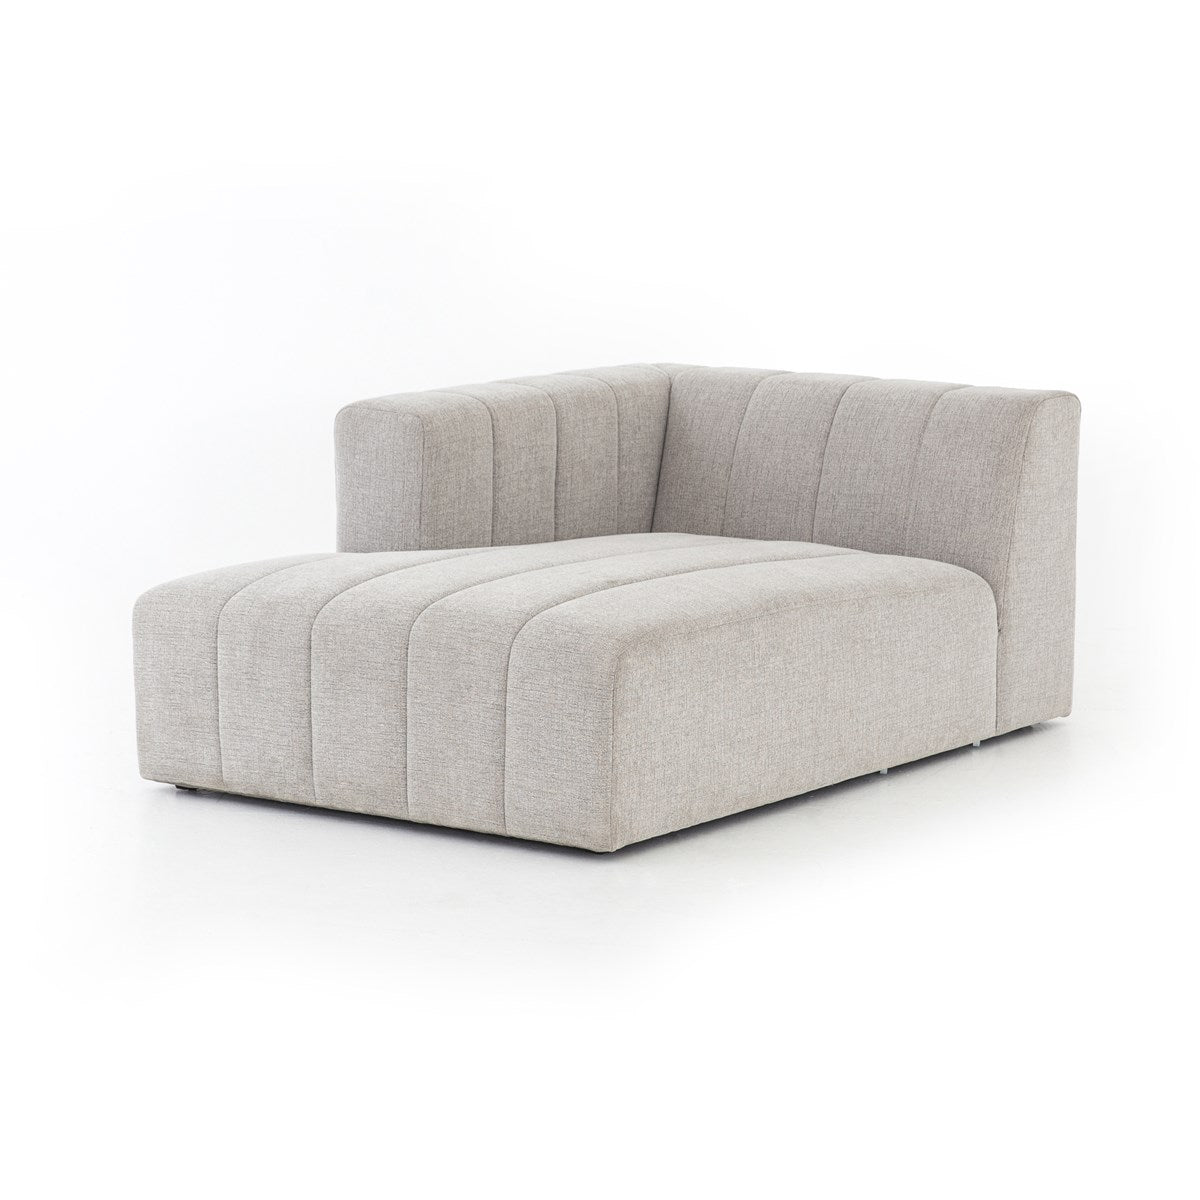 Langham Channeled Sectional Pieces Laf Chaise PieceSectional Sofa Four Hands  Laf Chaise Piece   Four Hands, Burke Decor, Mid Century Modern Furniture, Old Bones Furniture Company, Old Bones Co, Modern Mid Century, Designer Furniture, https://www.oldbonesco.com/